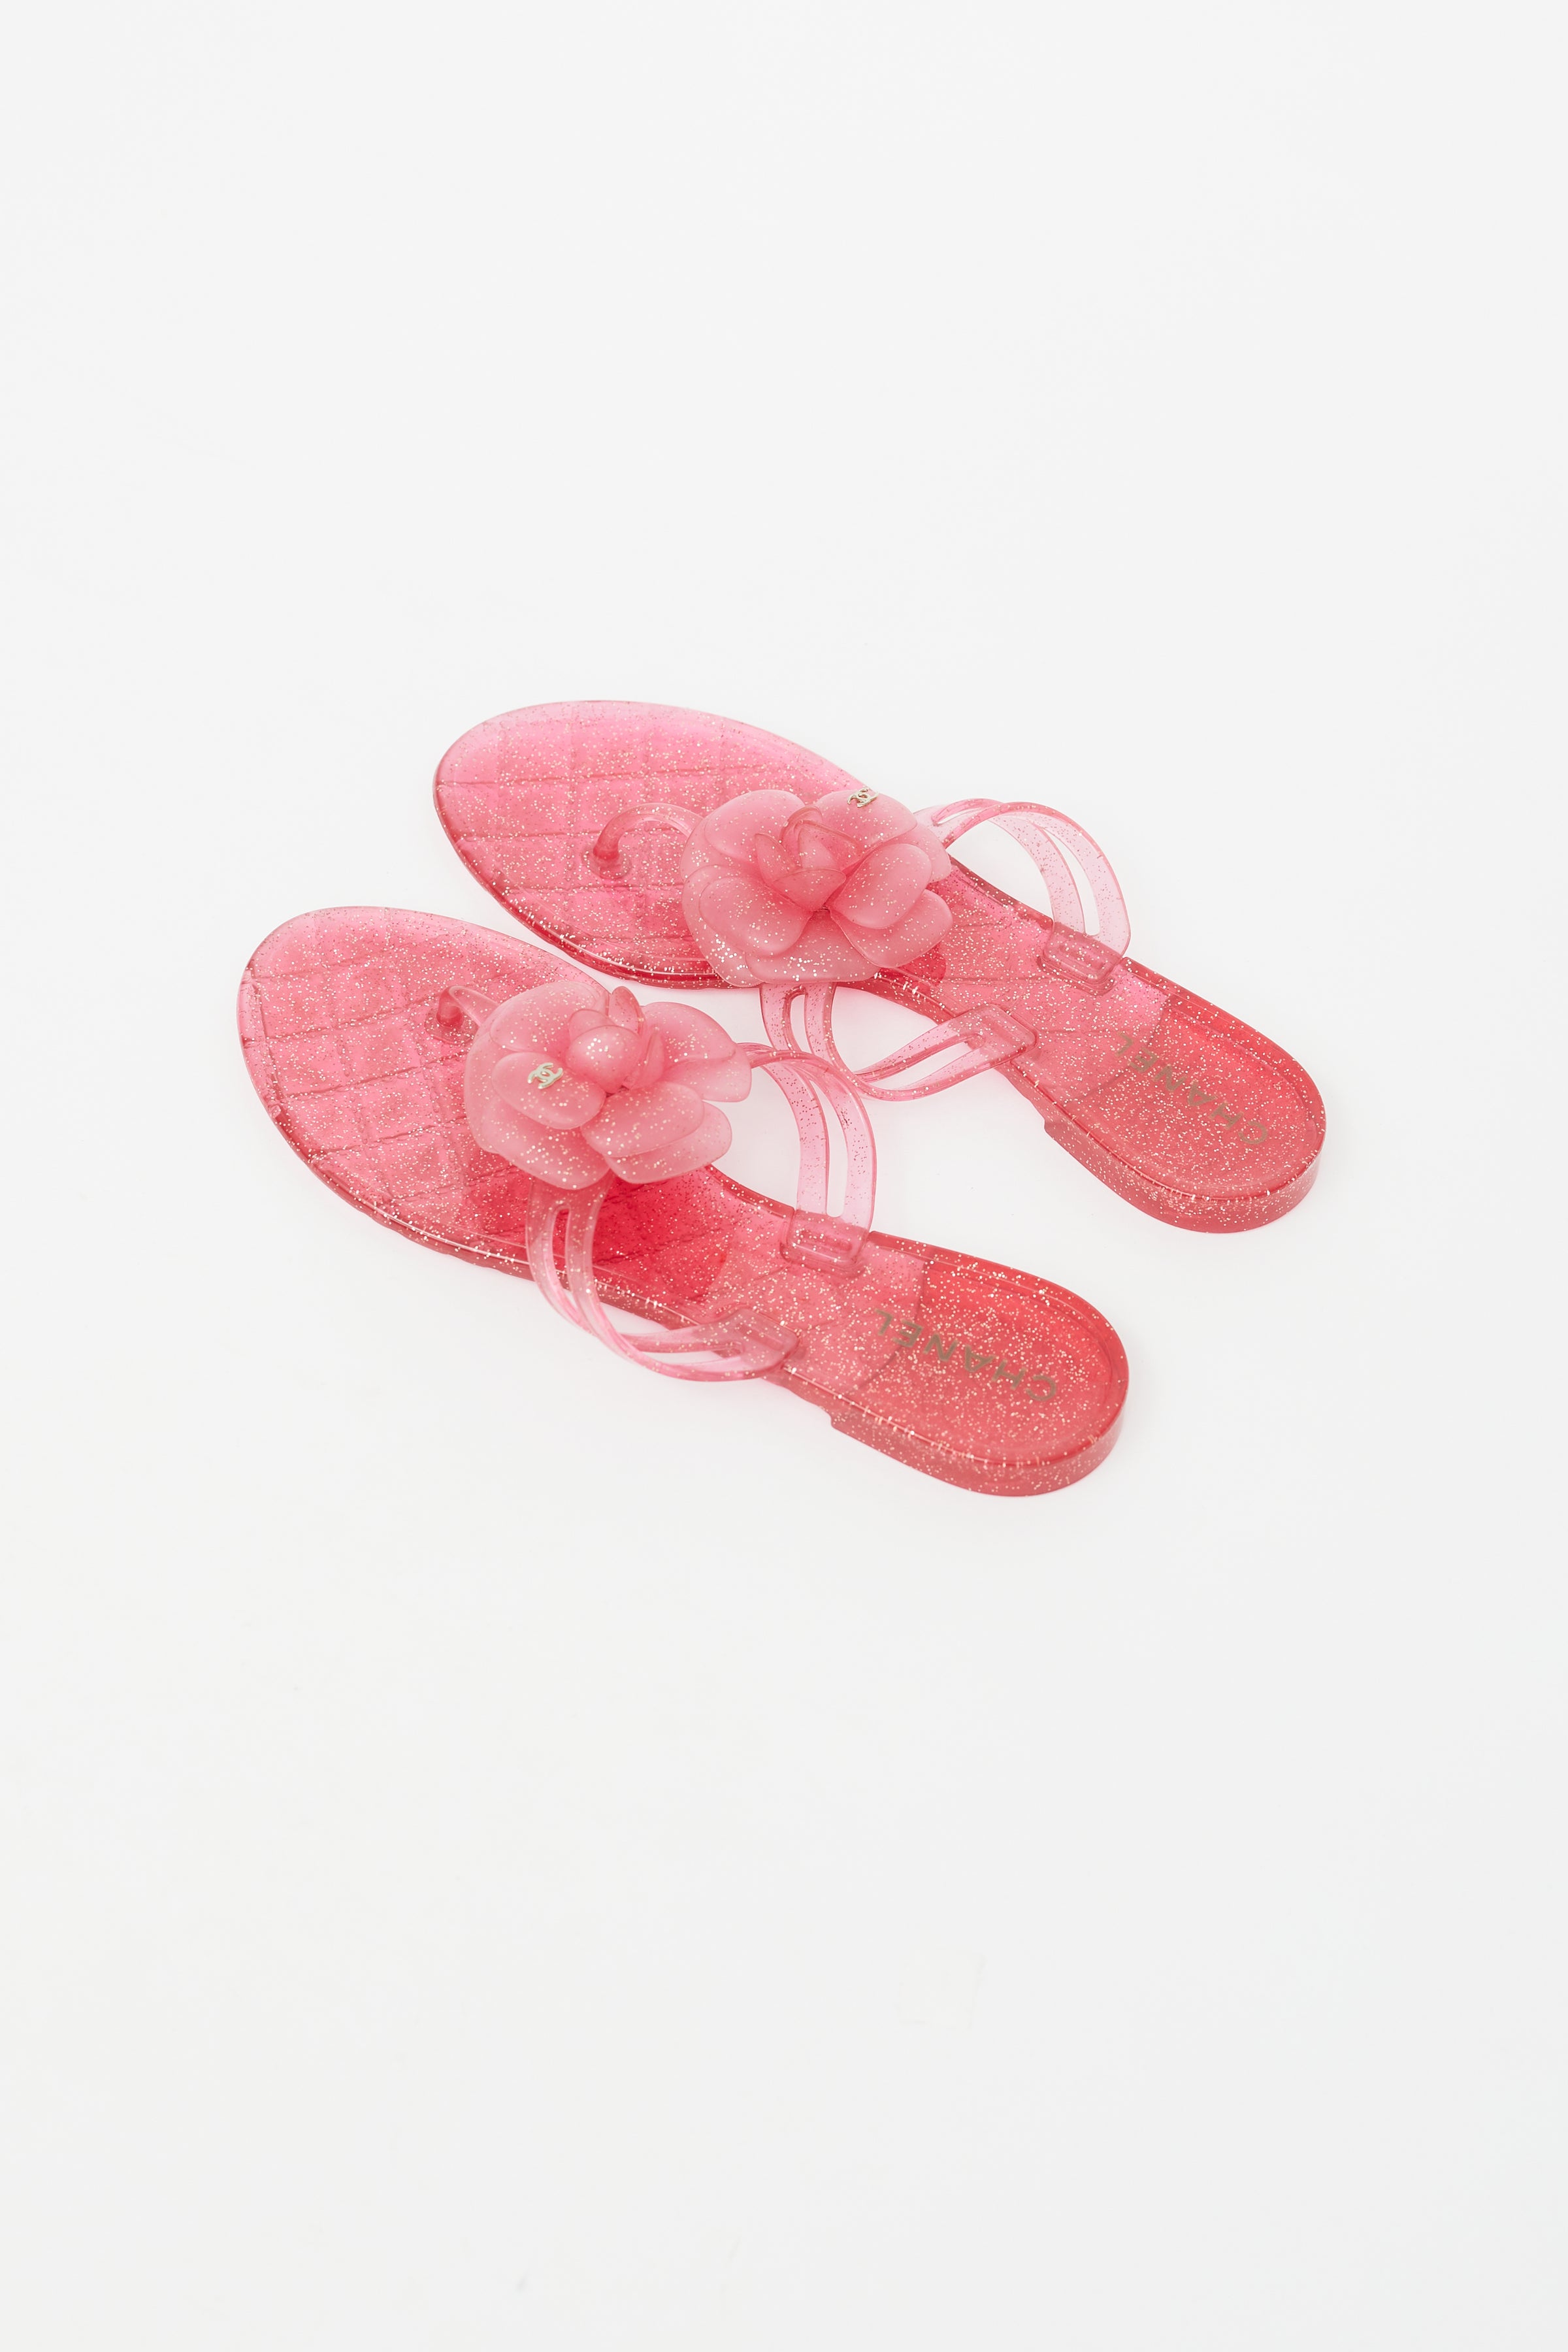 Chanel // Pink Jelly Camellia Sandal – VSP Consignment